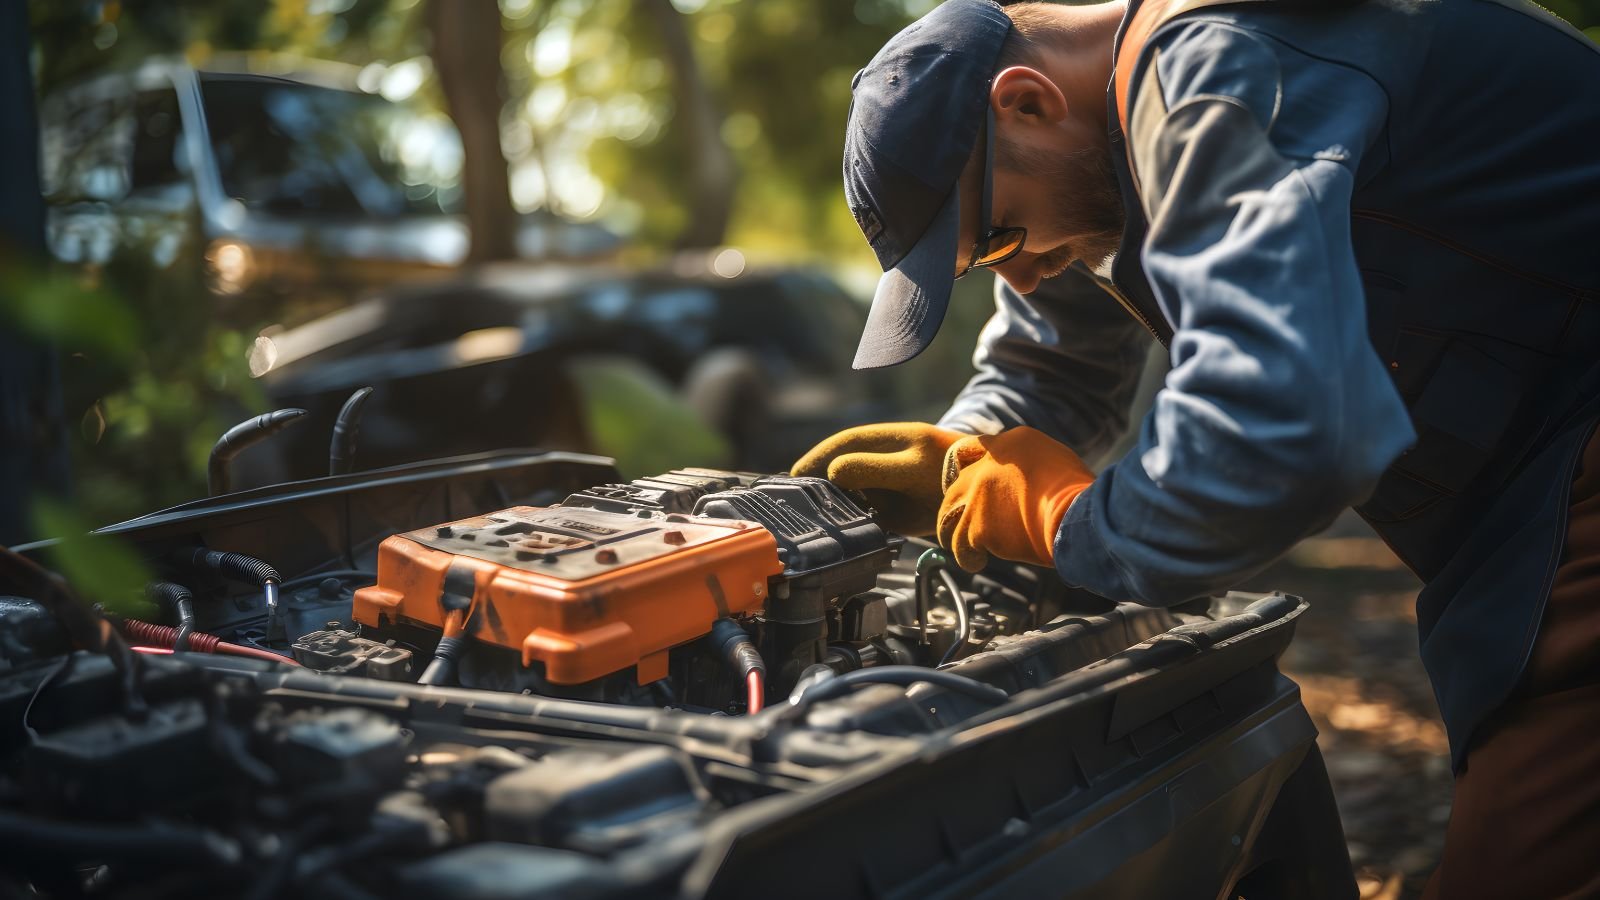 <p>Worries about battery longevity and replacement costs add to EV hesitancy. Consumers fear the expense of replacing an EV battery. The potential high cost overshadows possible savings on gas. This uncertainty makes gasoline cars seem like a safer bet.</p>